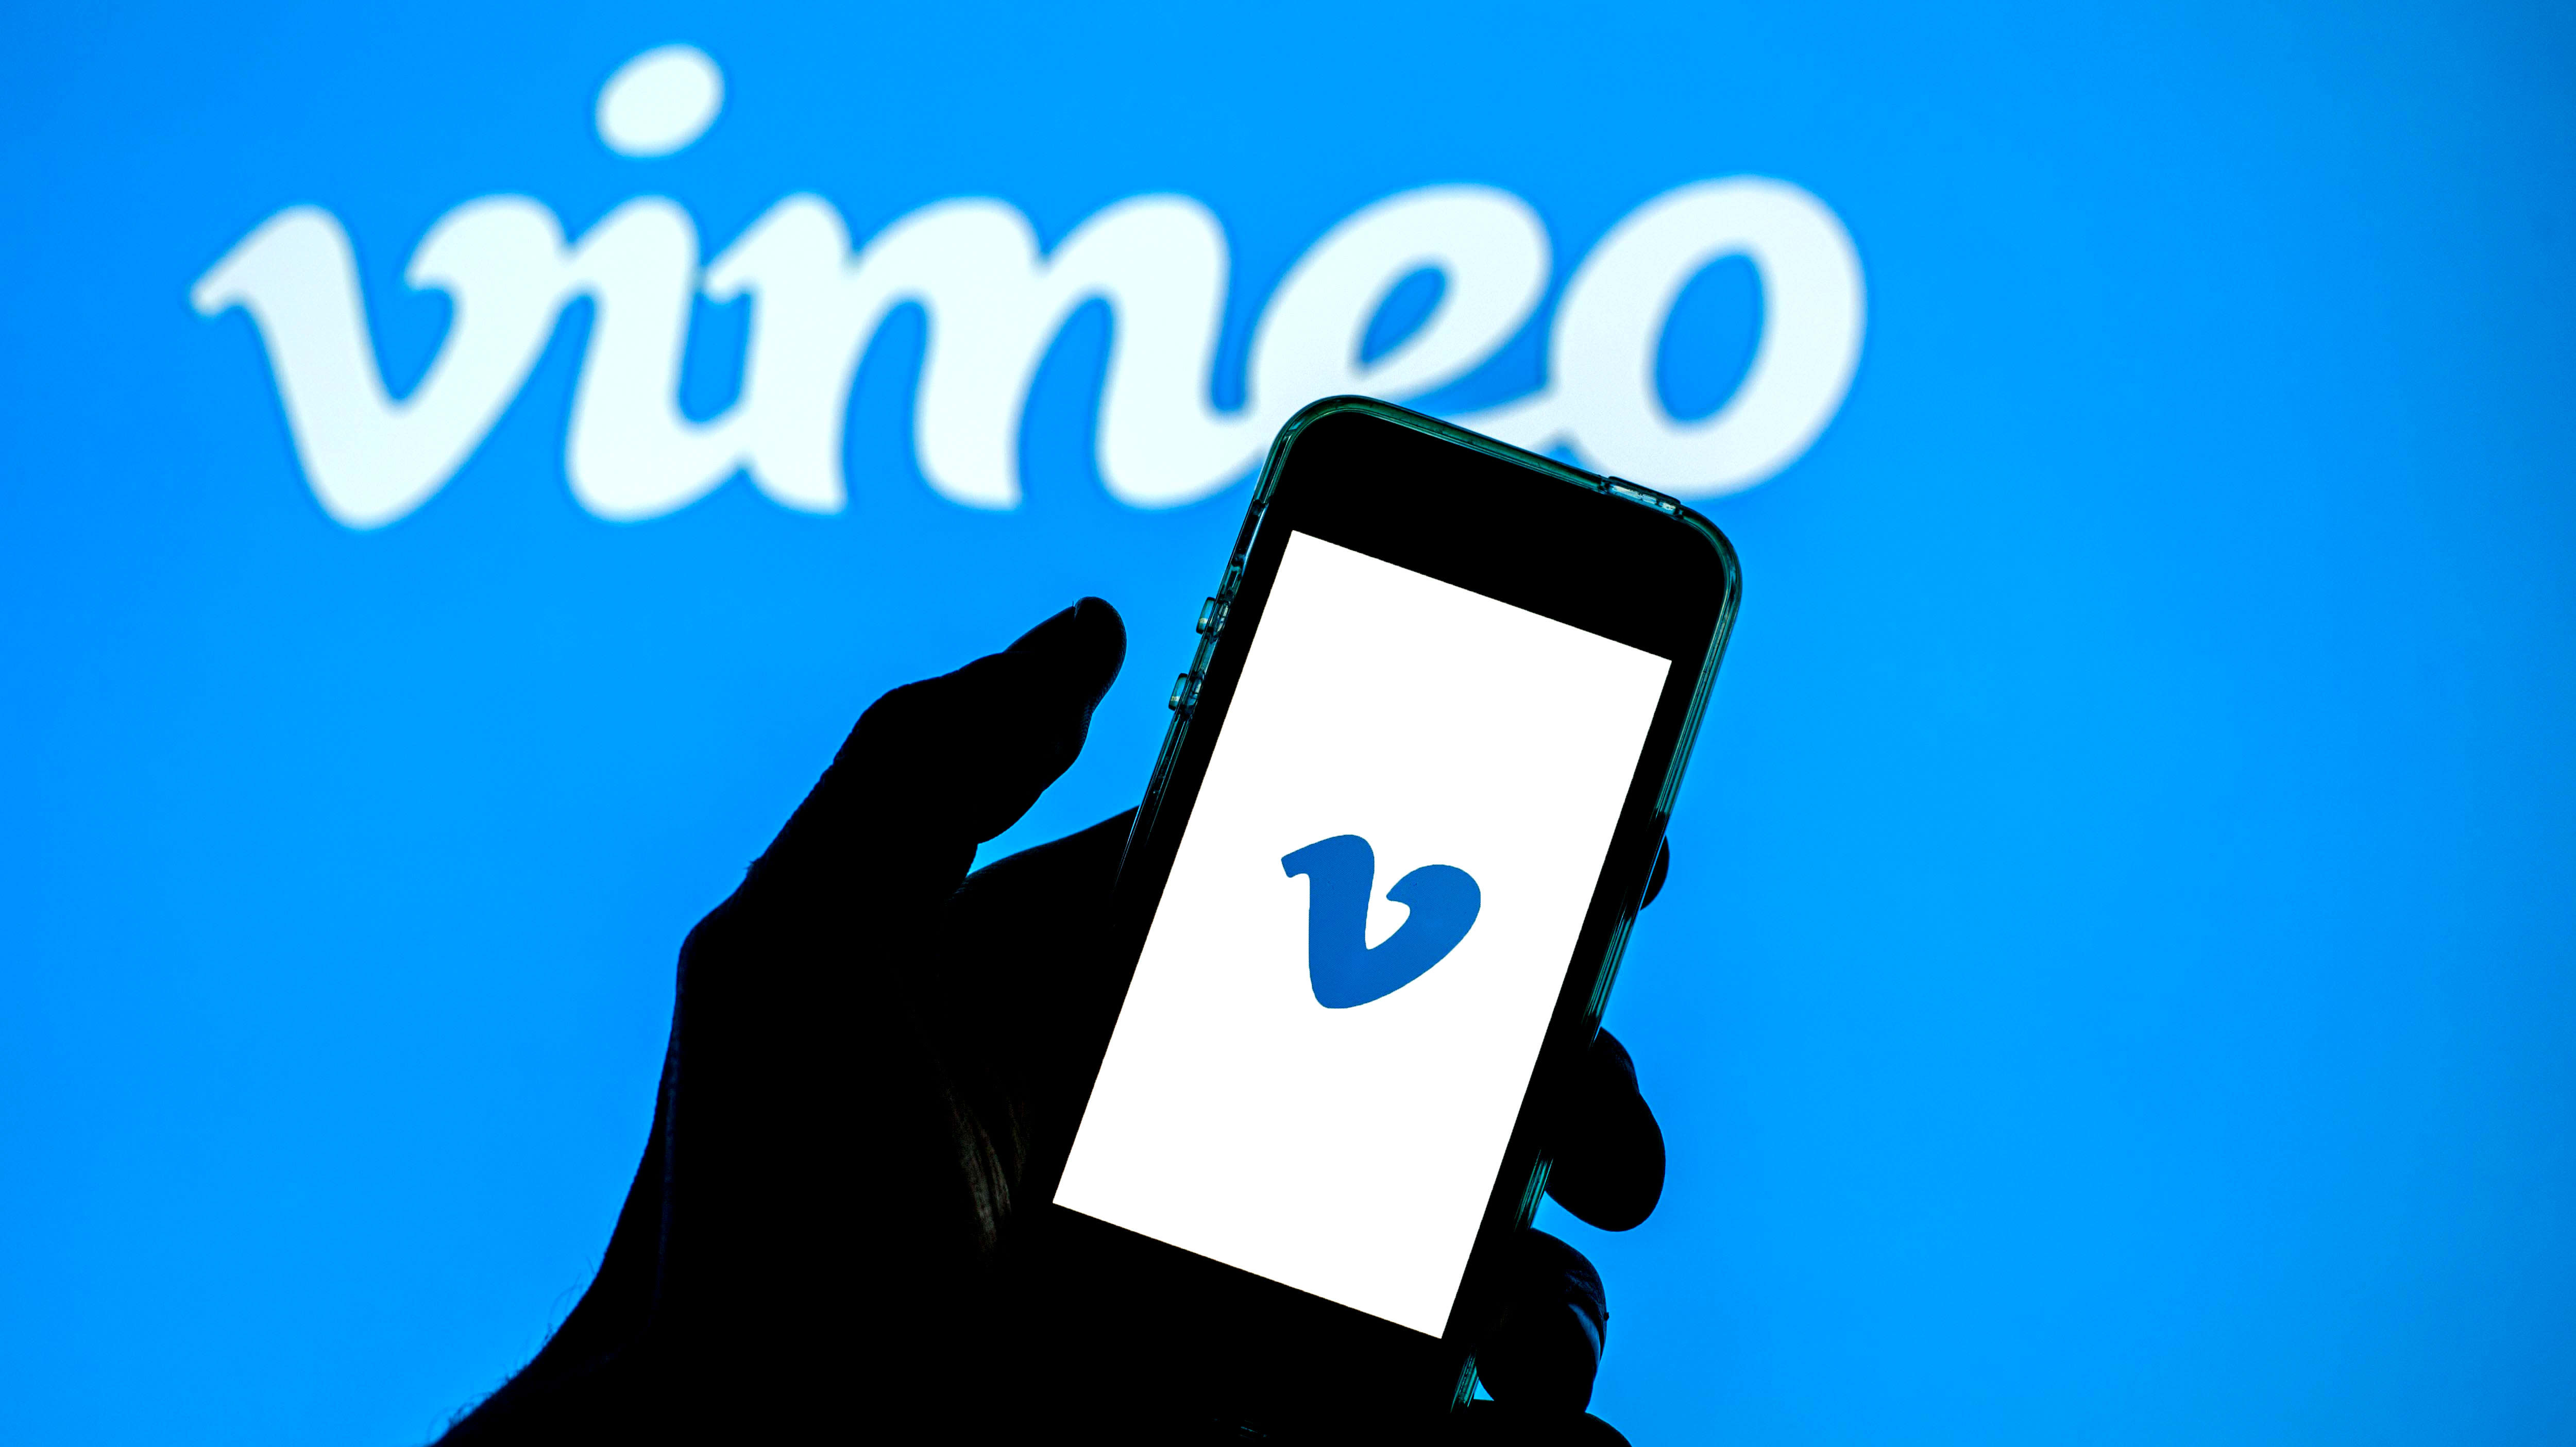 Vimeo stock falls in trading debut, CEO says firm is looking for MandA deals